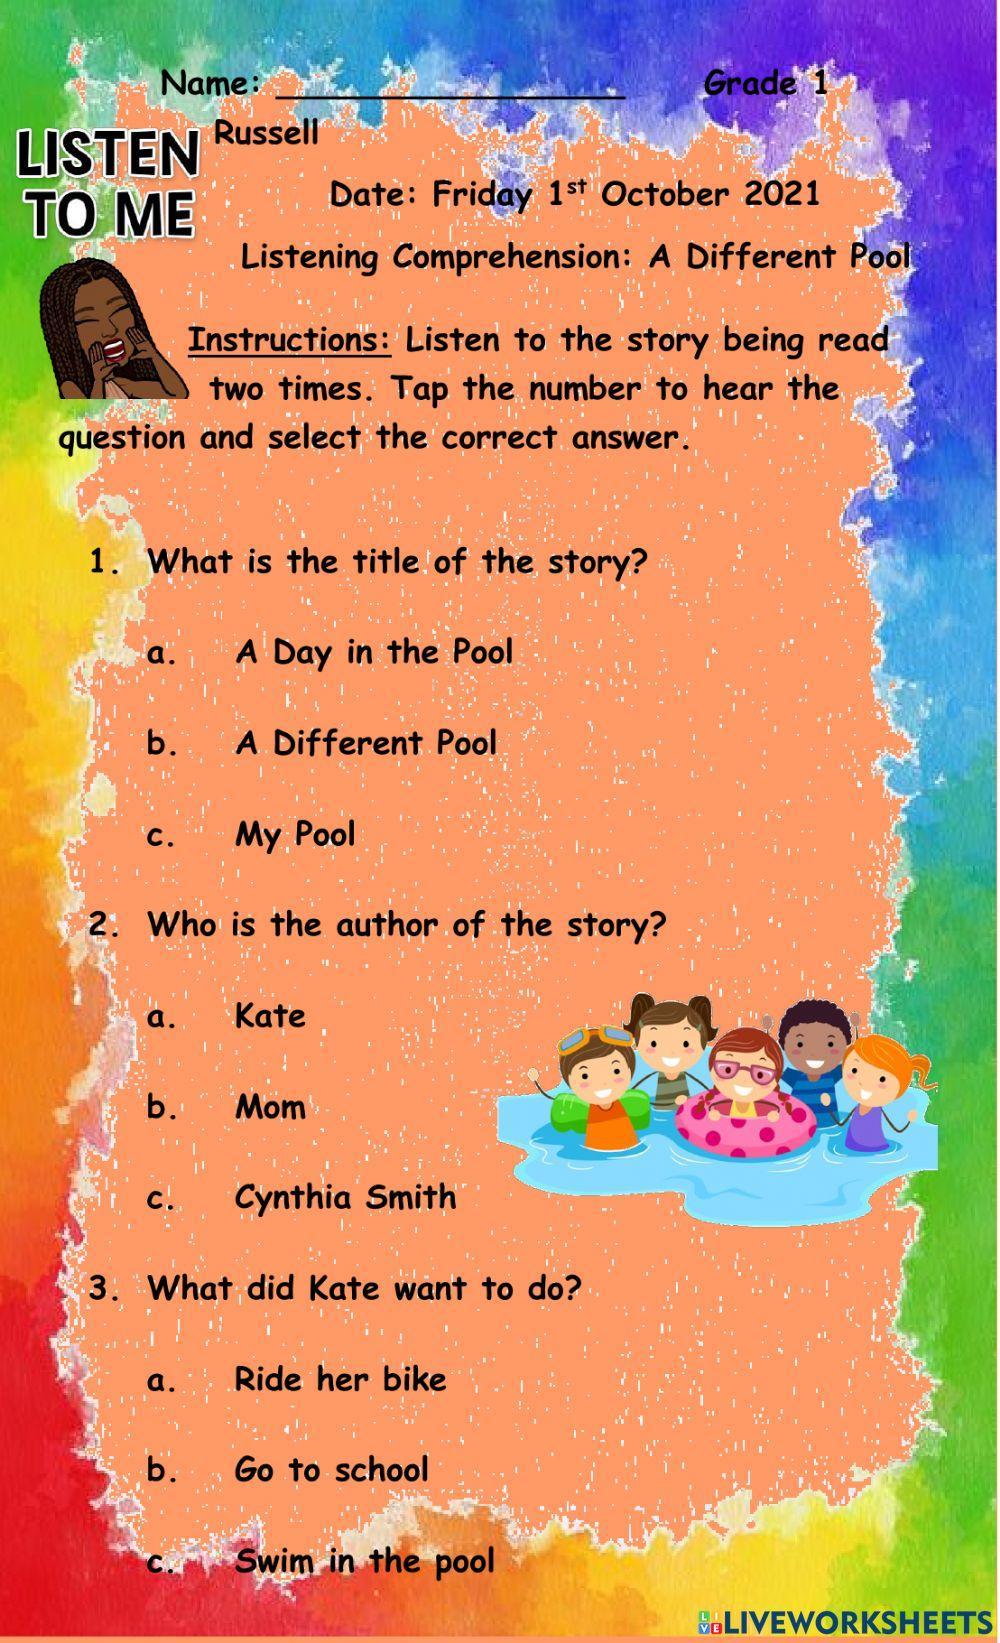 Listening Comprehension: A Different Pool